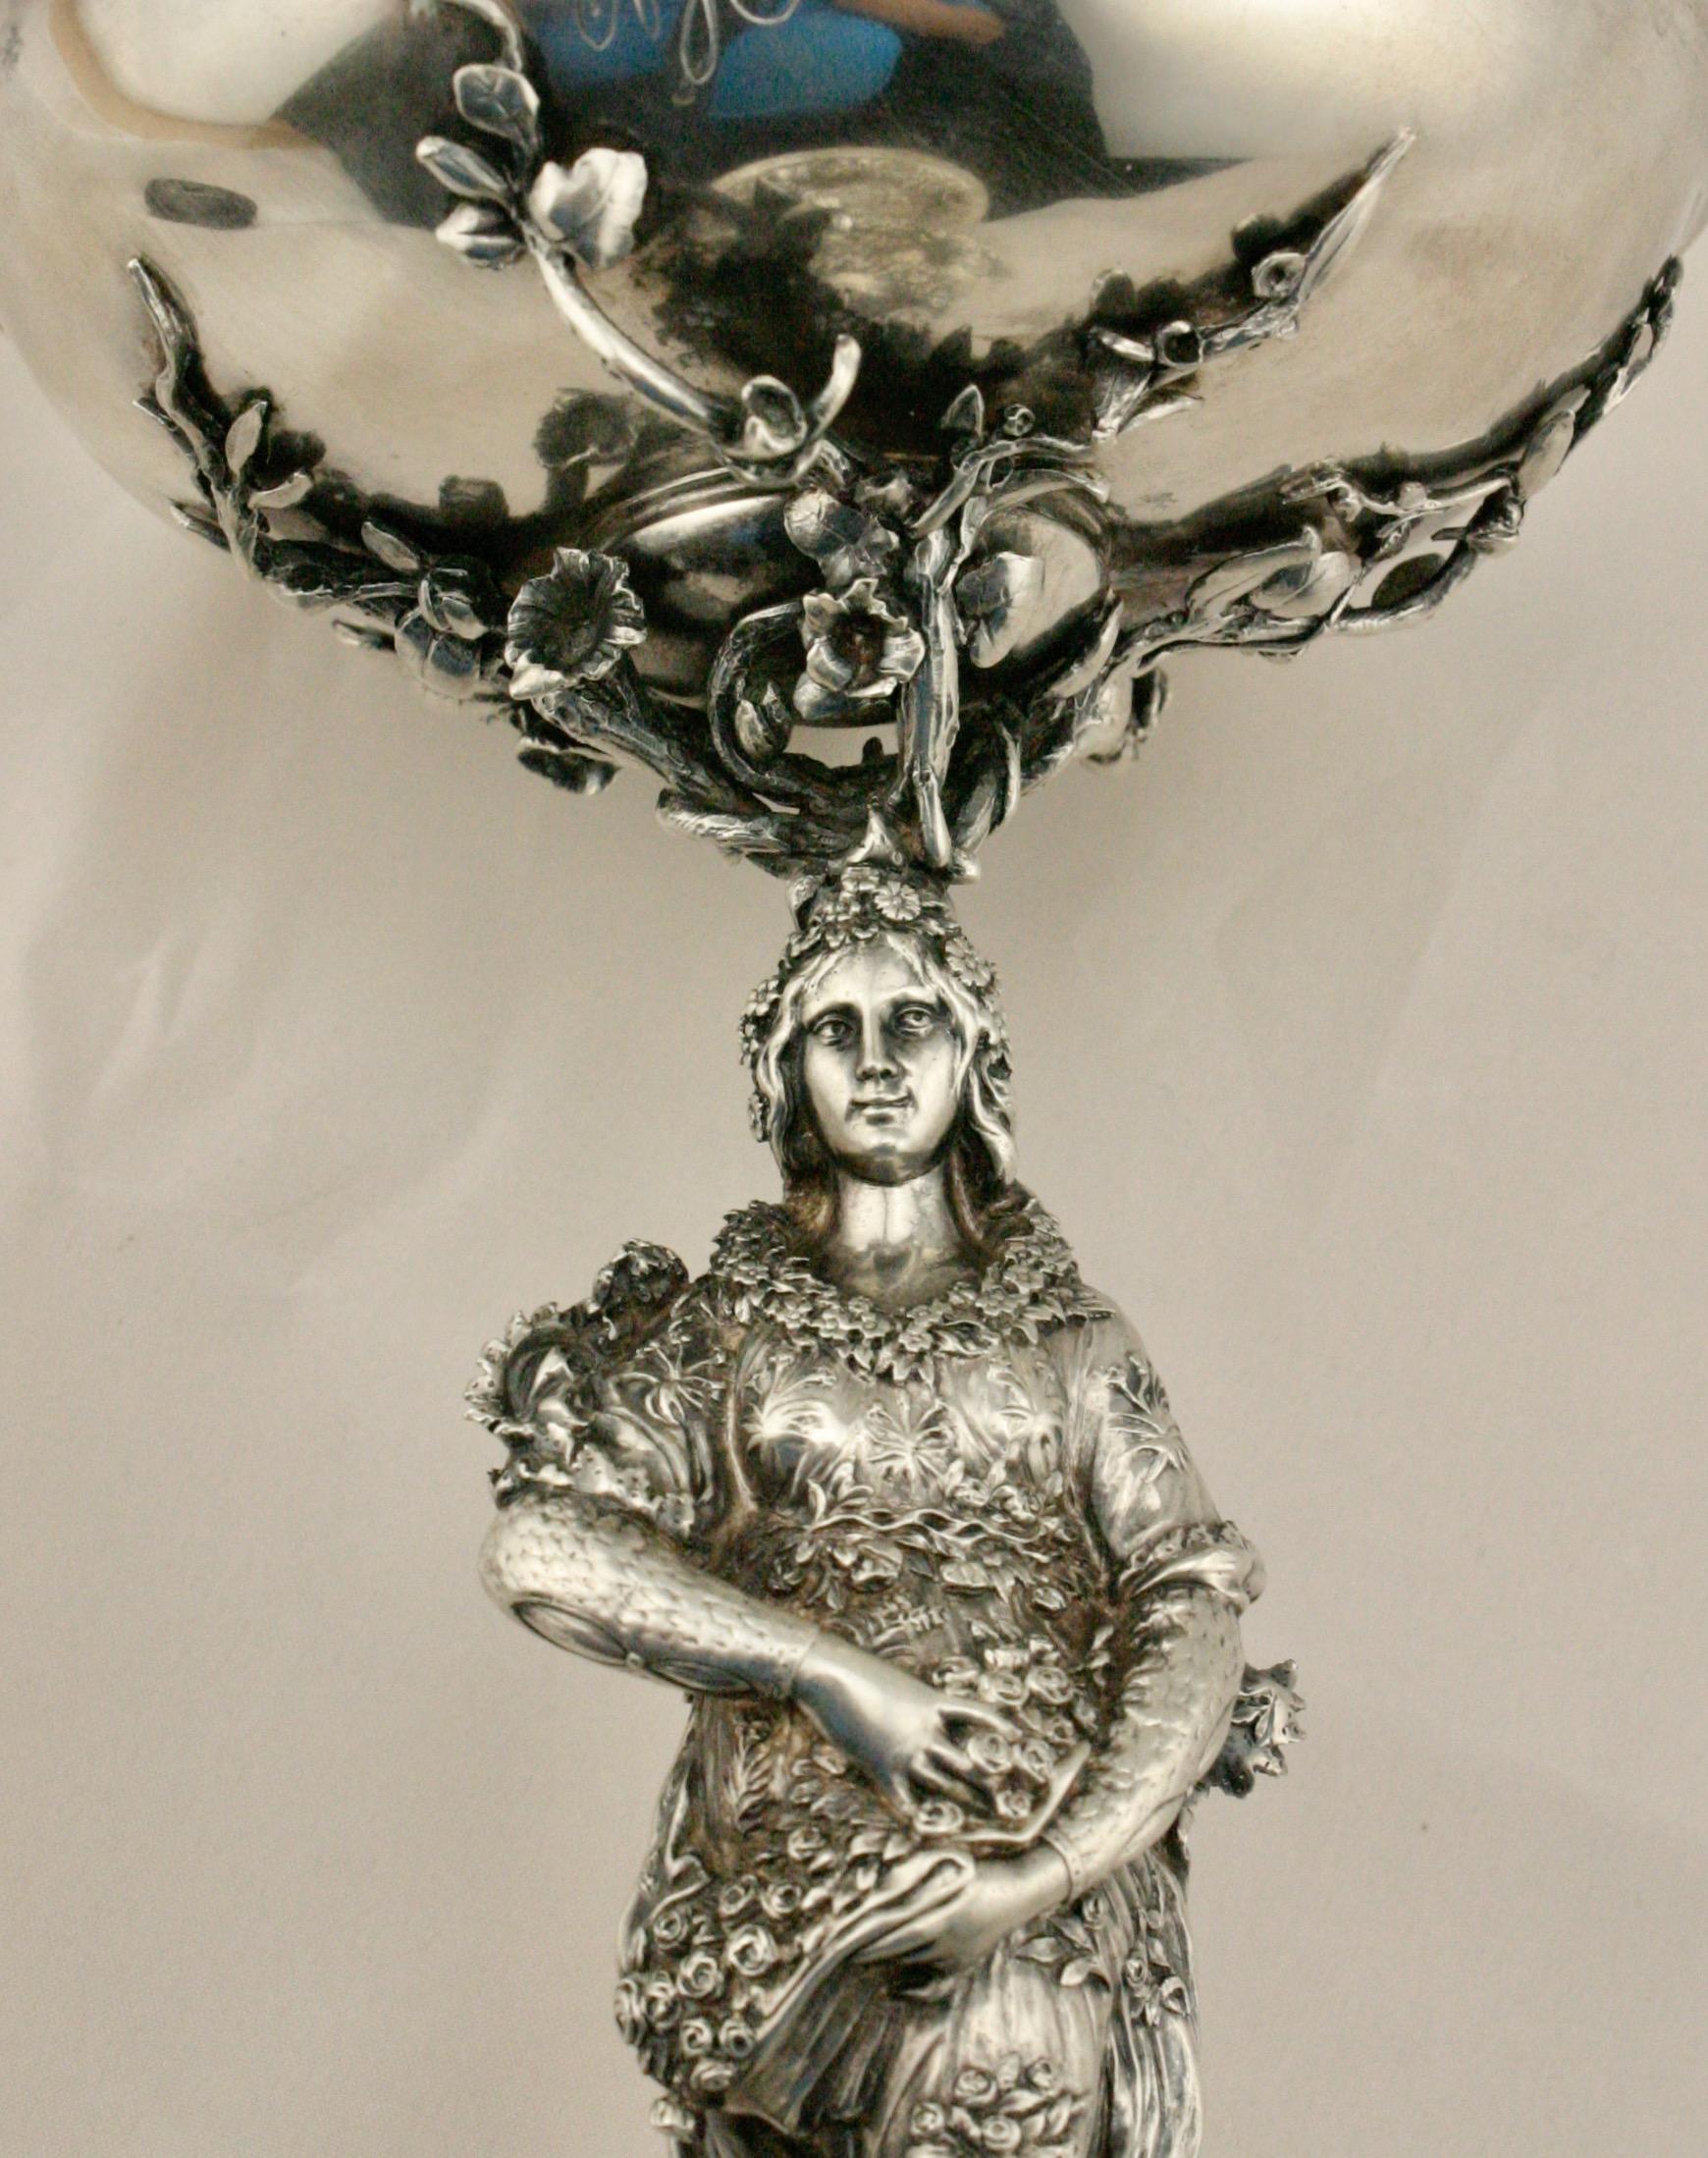 Renaissance Revival Italian Silver Figural Compote of Flora by G. Accarisi, Florence